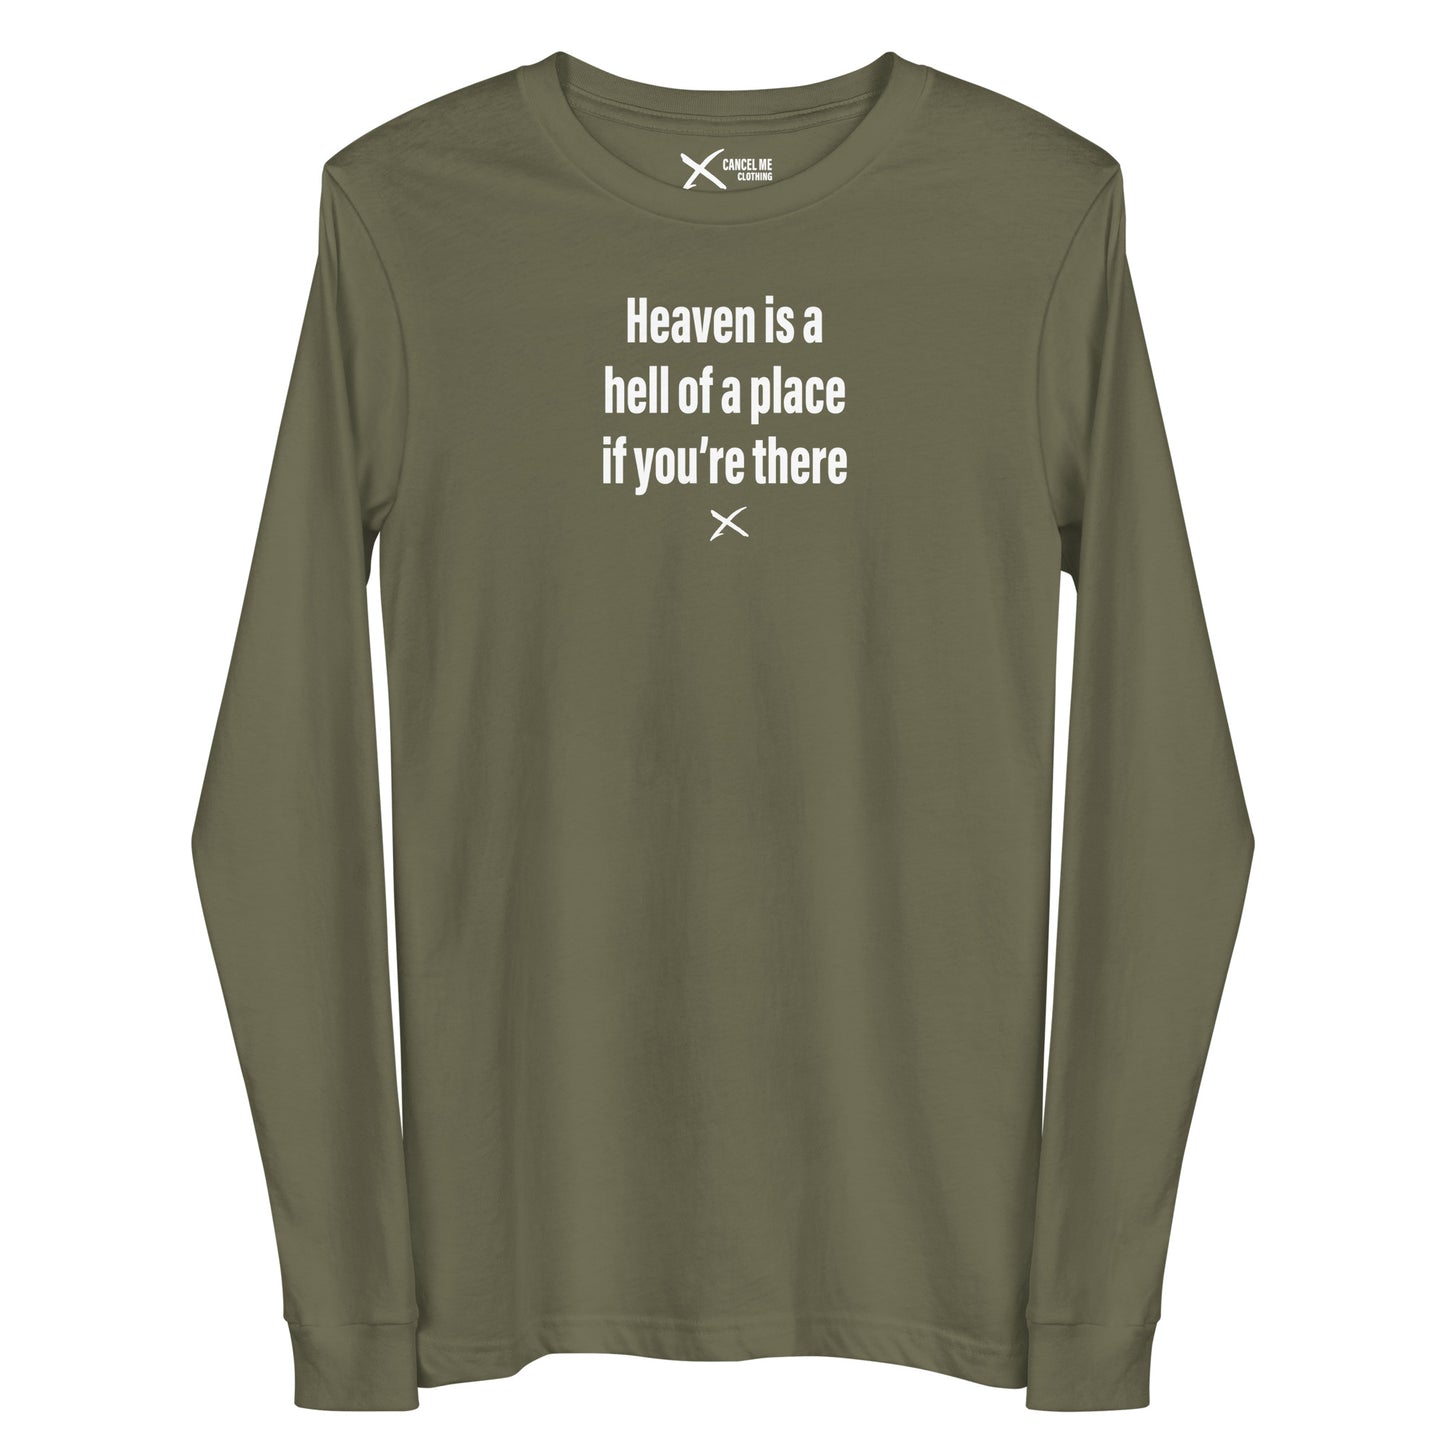 Heaven is a hell of a place if you're there - Longsleeve